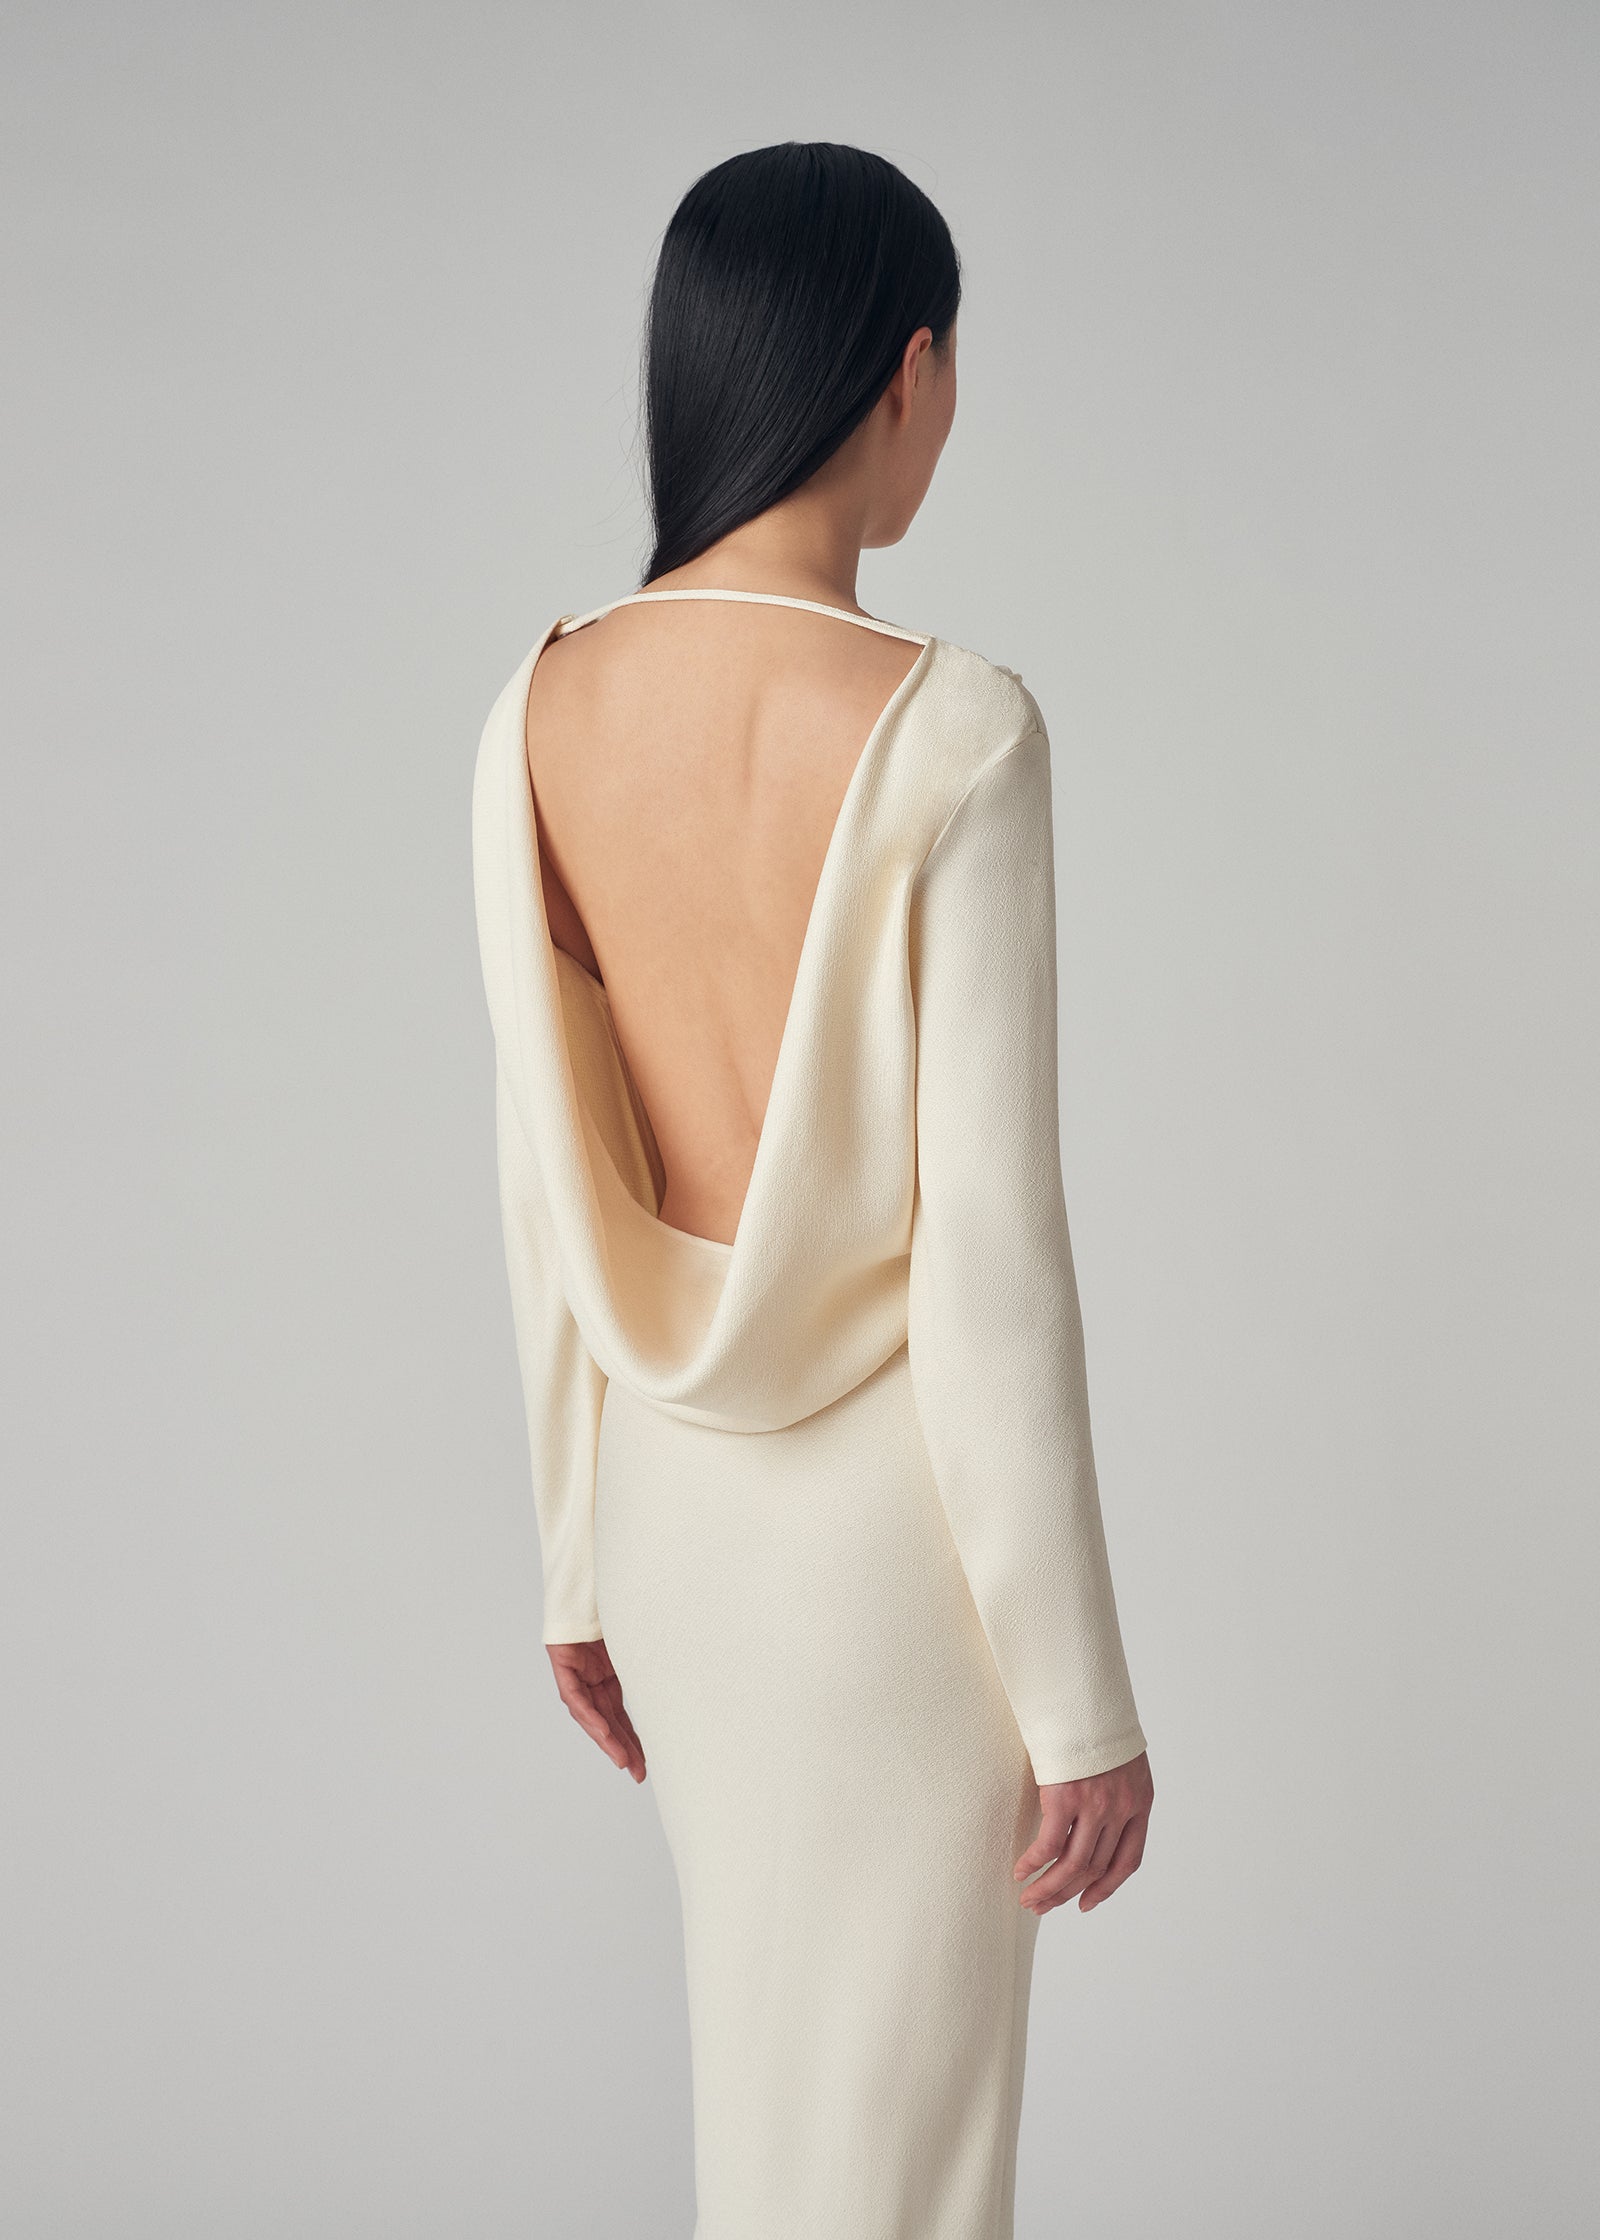 Cowl Back Long Dress in Viscose Crepe - Ivory - CO Collections